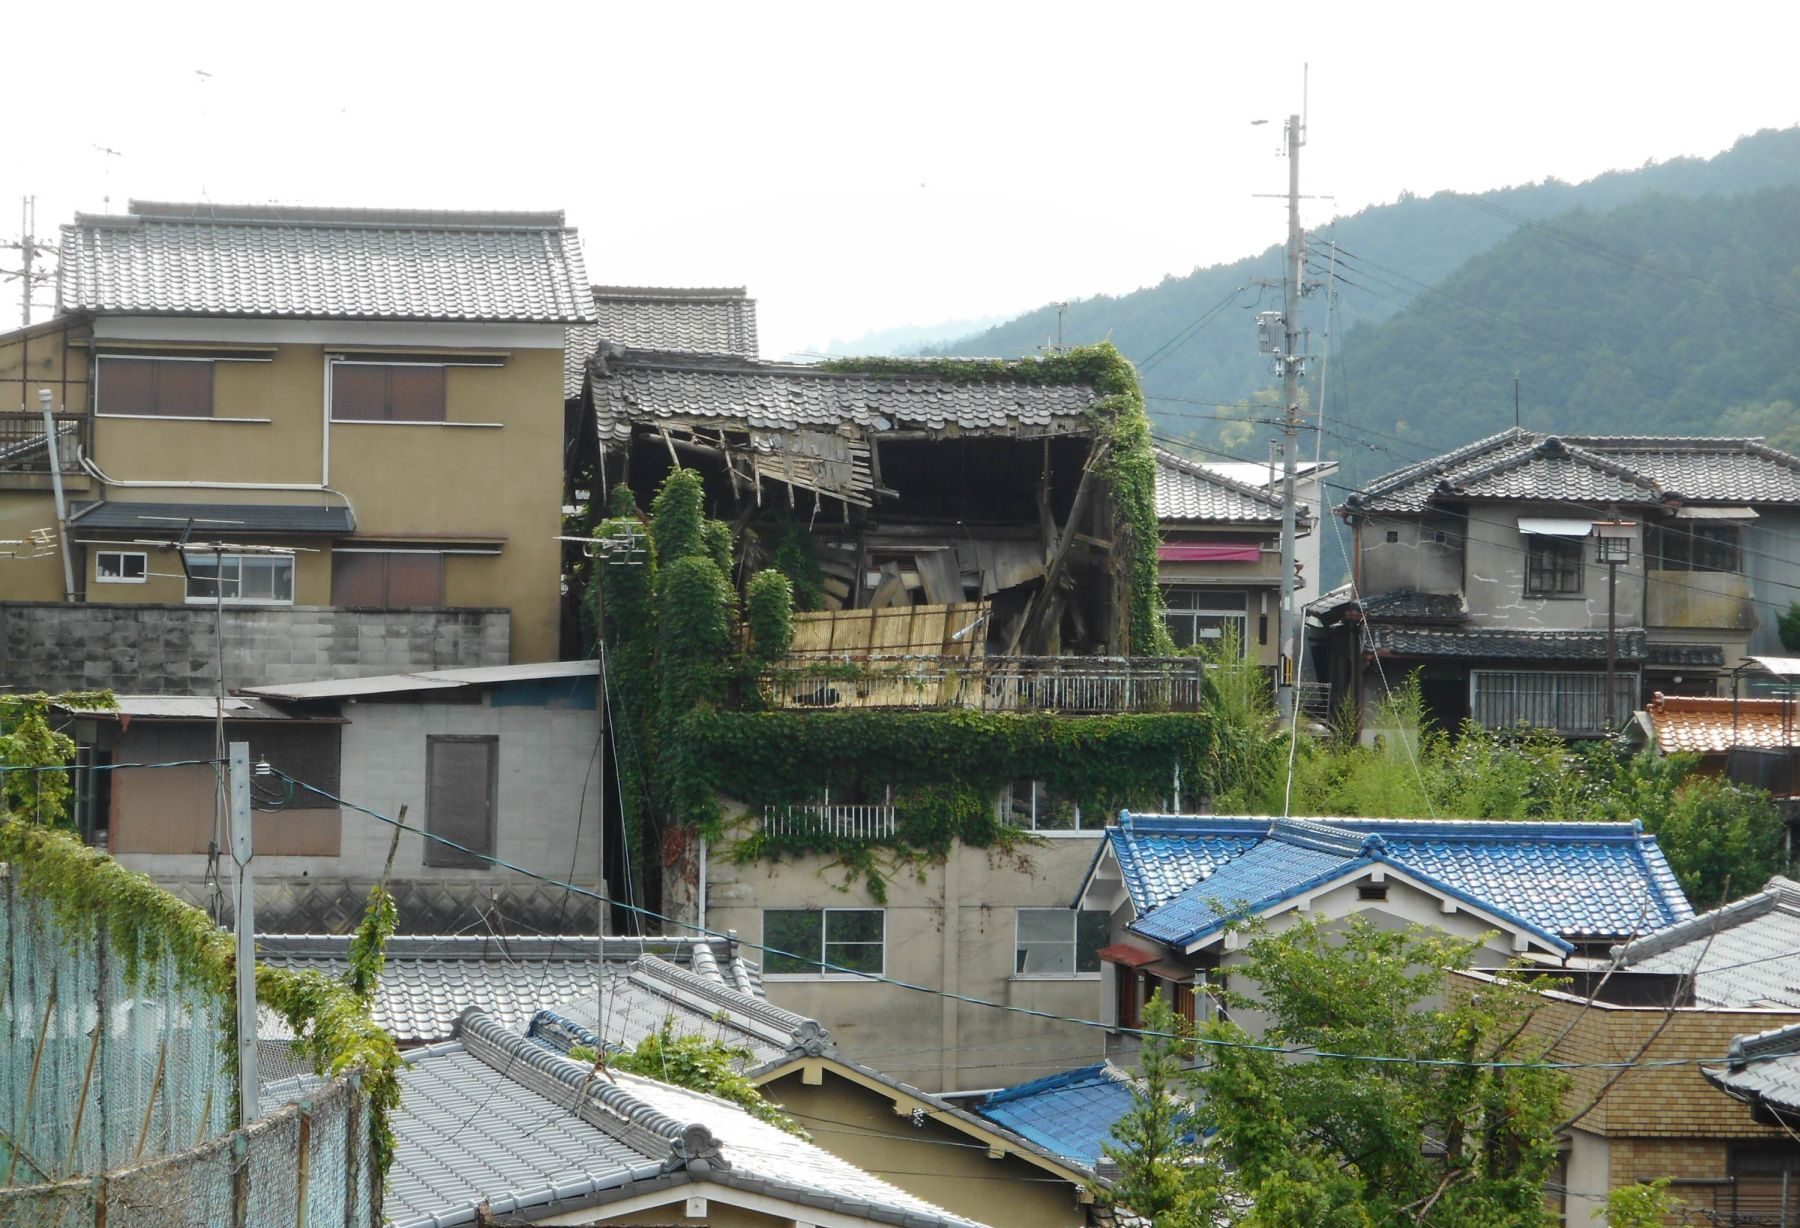 The tumble down houses in Japan 007